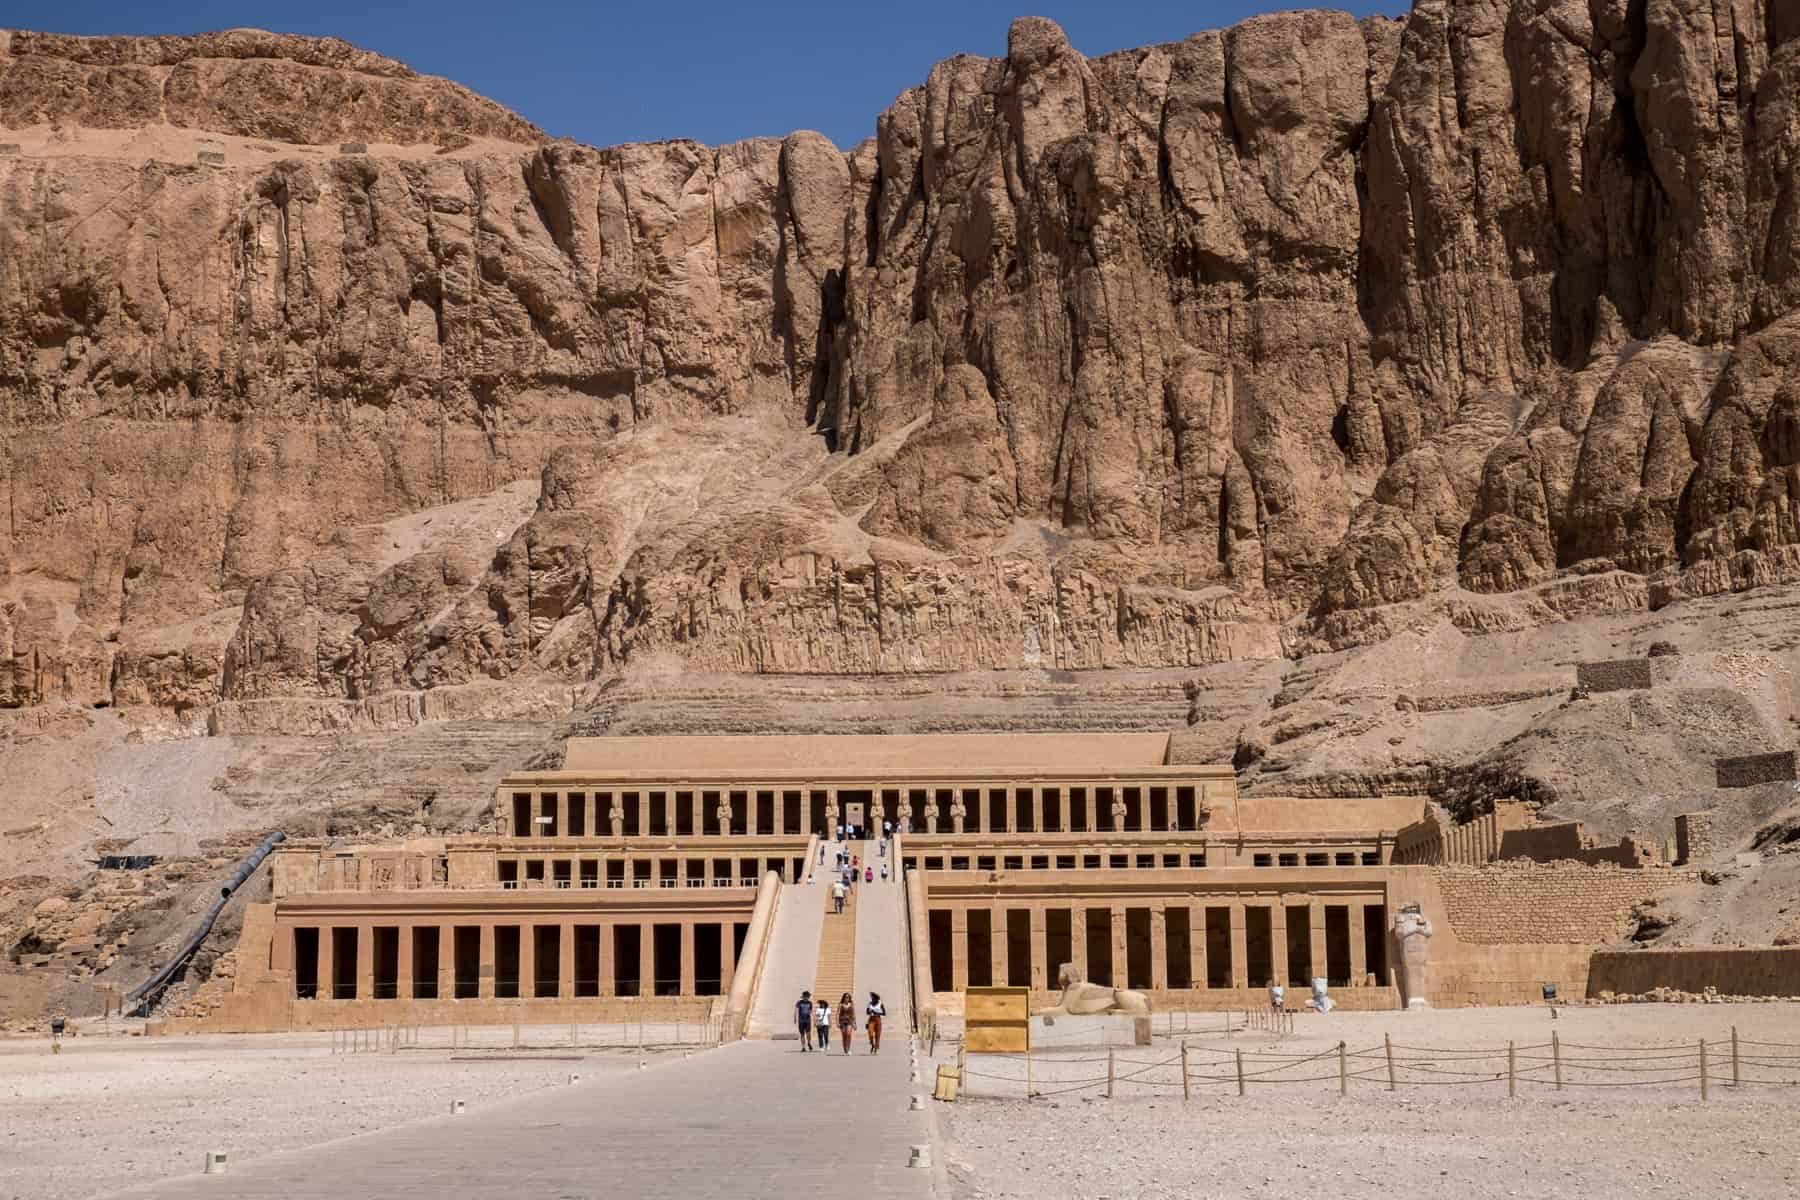 The classic architectural style made up of three levels of columns of the Temple of Hatshepsut in Luxor, Egypt